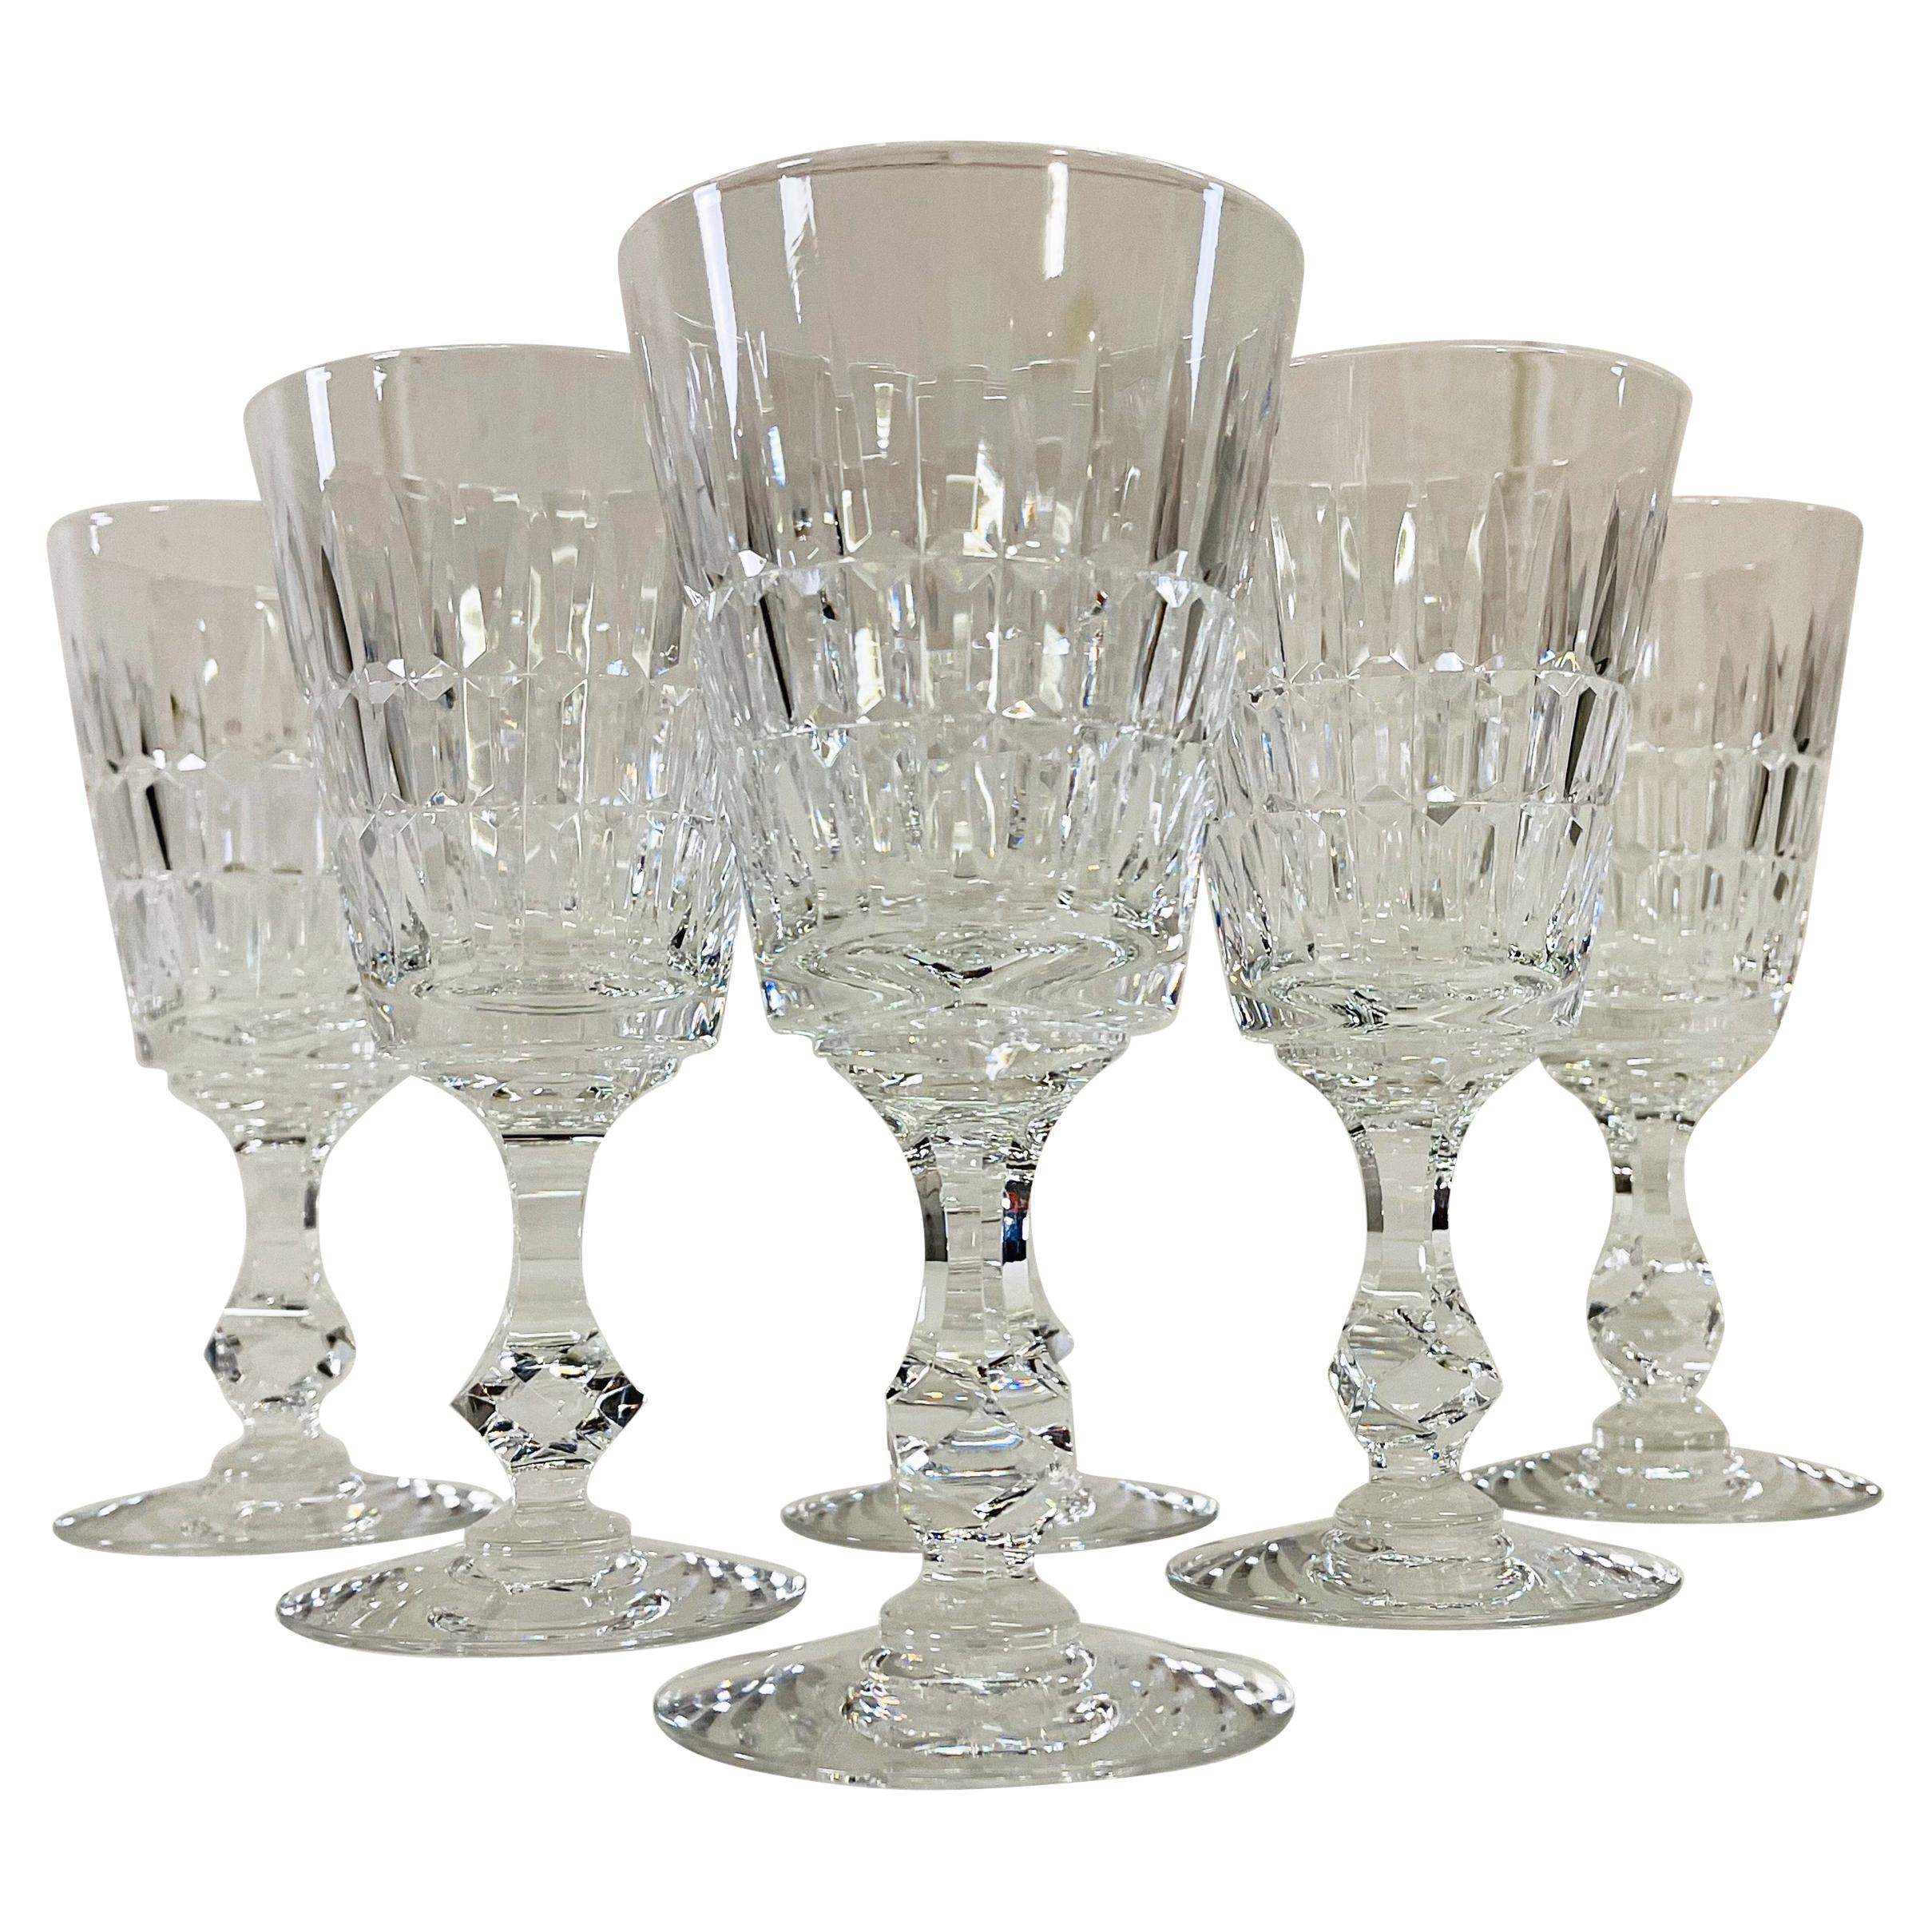 1960s Mitred Cut Crystal Glass Wine Stems, Set of 6 For Sale